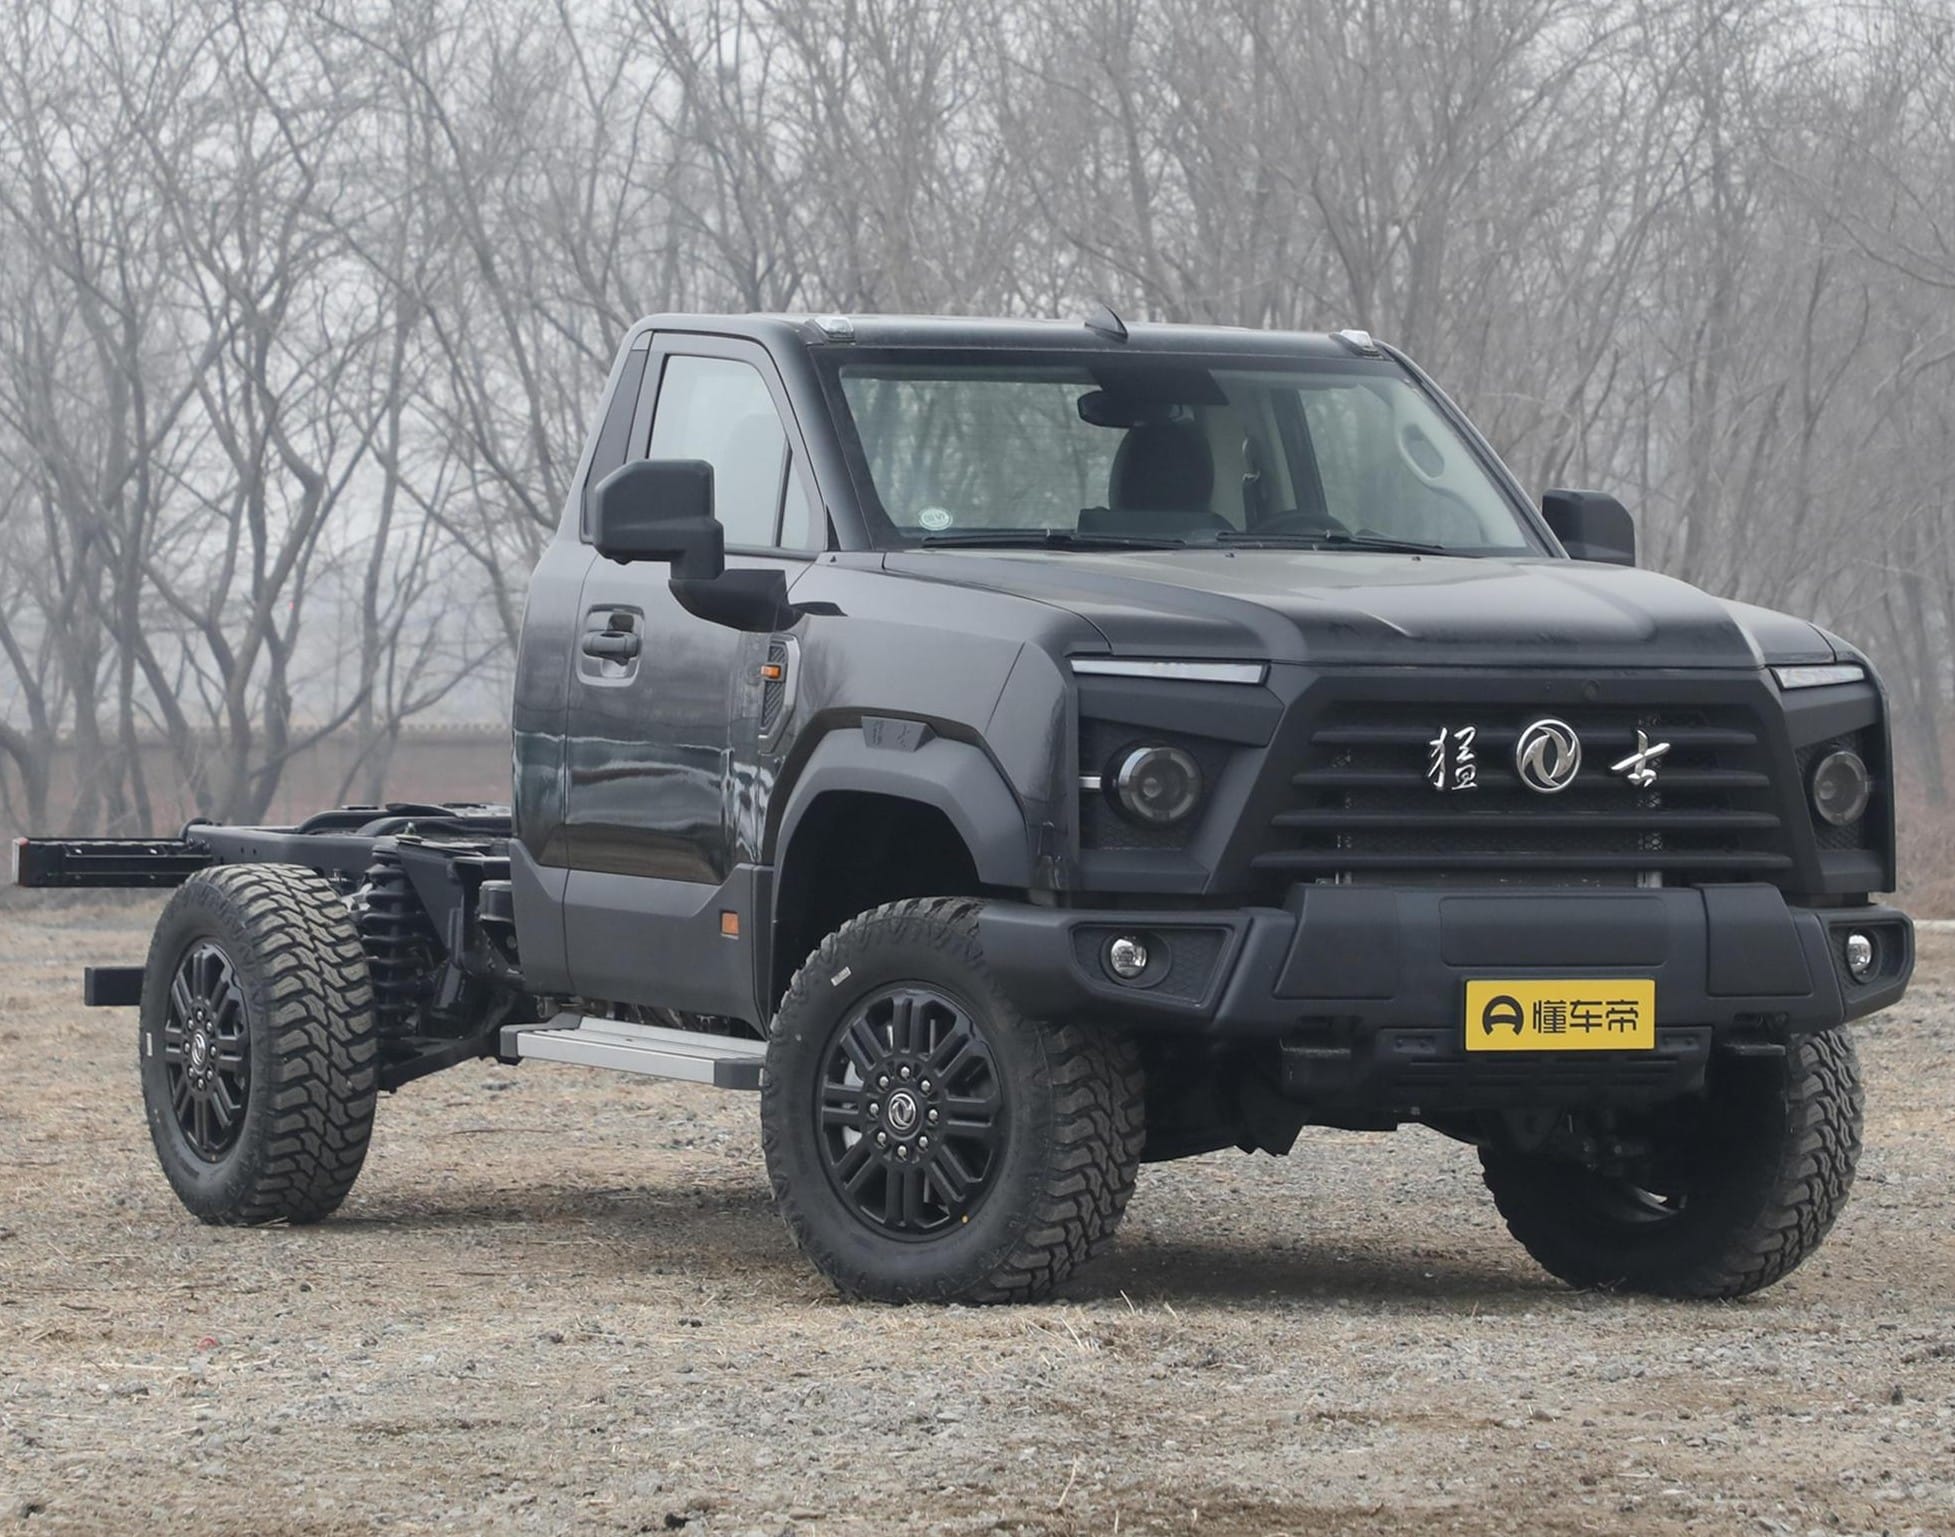 dongfeng military truck